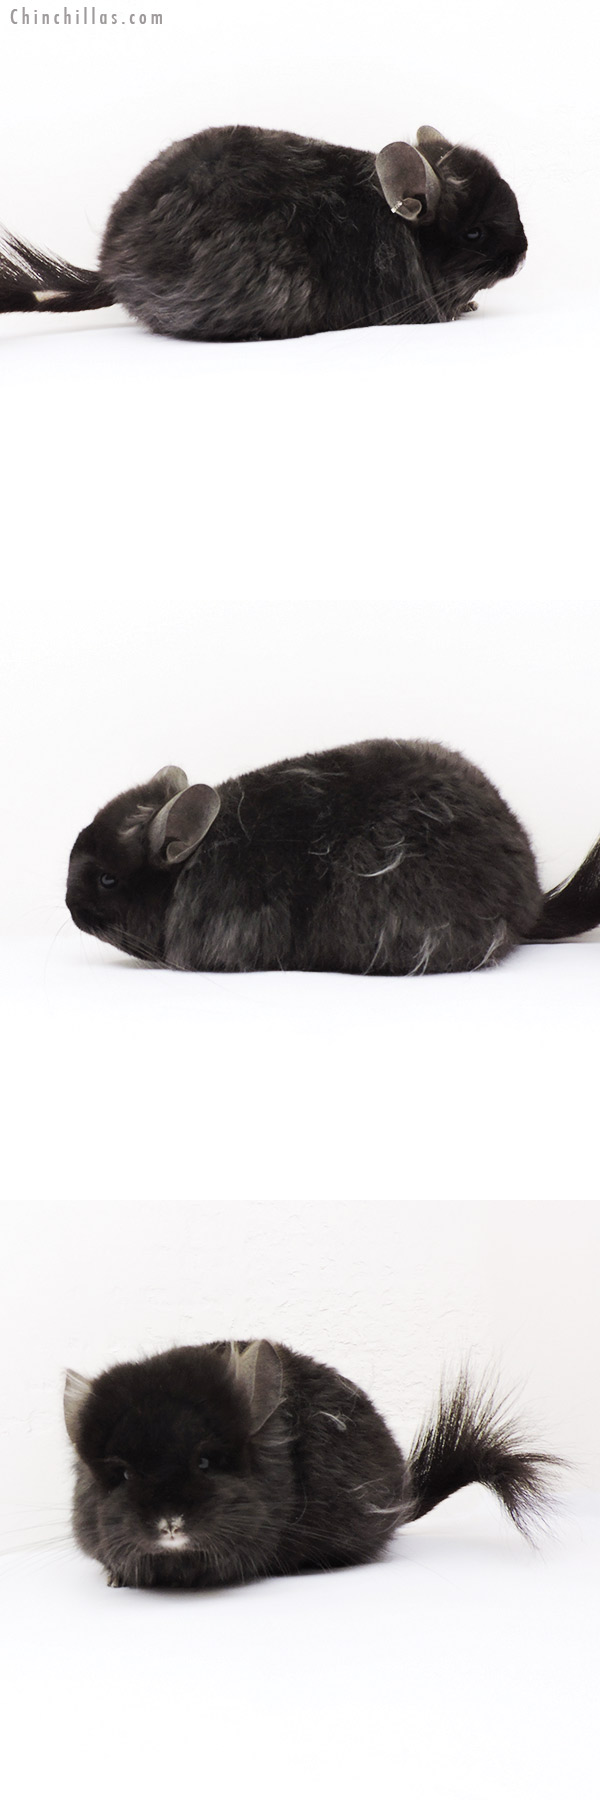 Chinchilla or related item offered for sale or export on Chinchillas.com - 19269 Exceptional Brevi Type Ebony ( Locken Carrier )  Royal Persian Angora Female Chinchilla